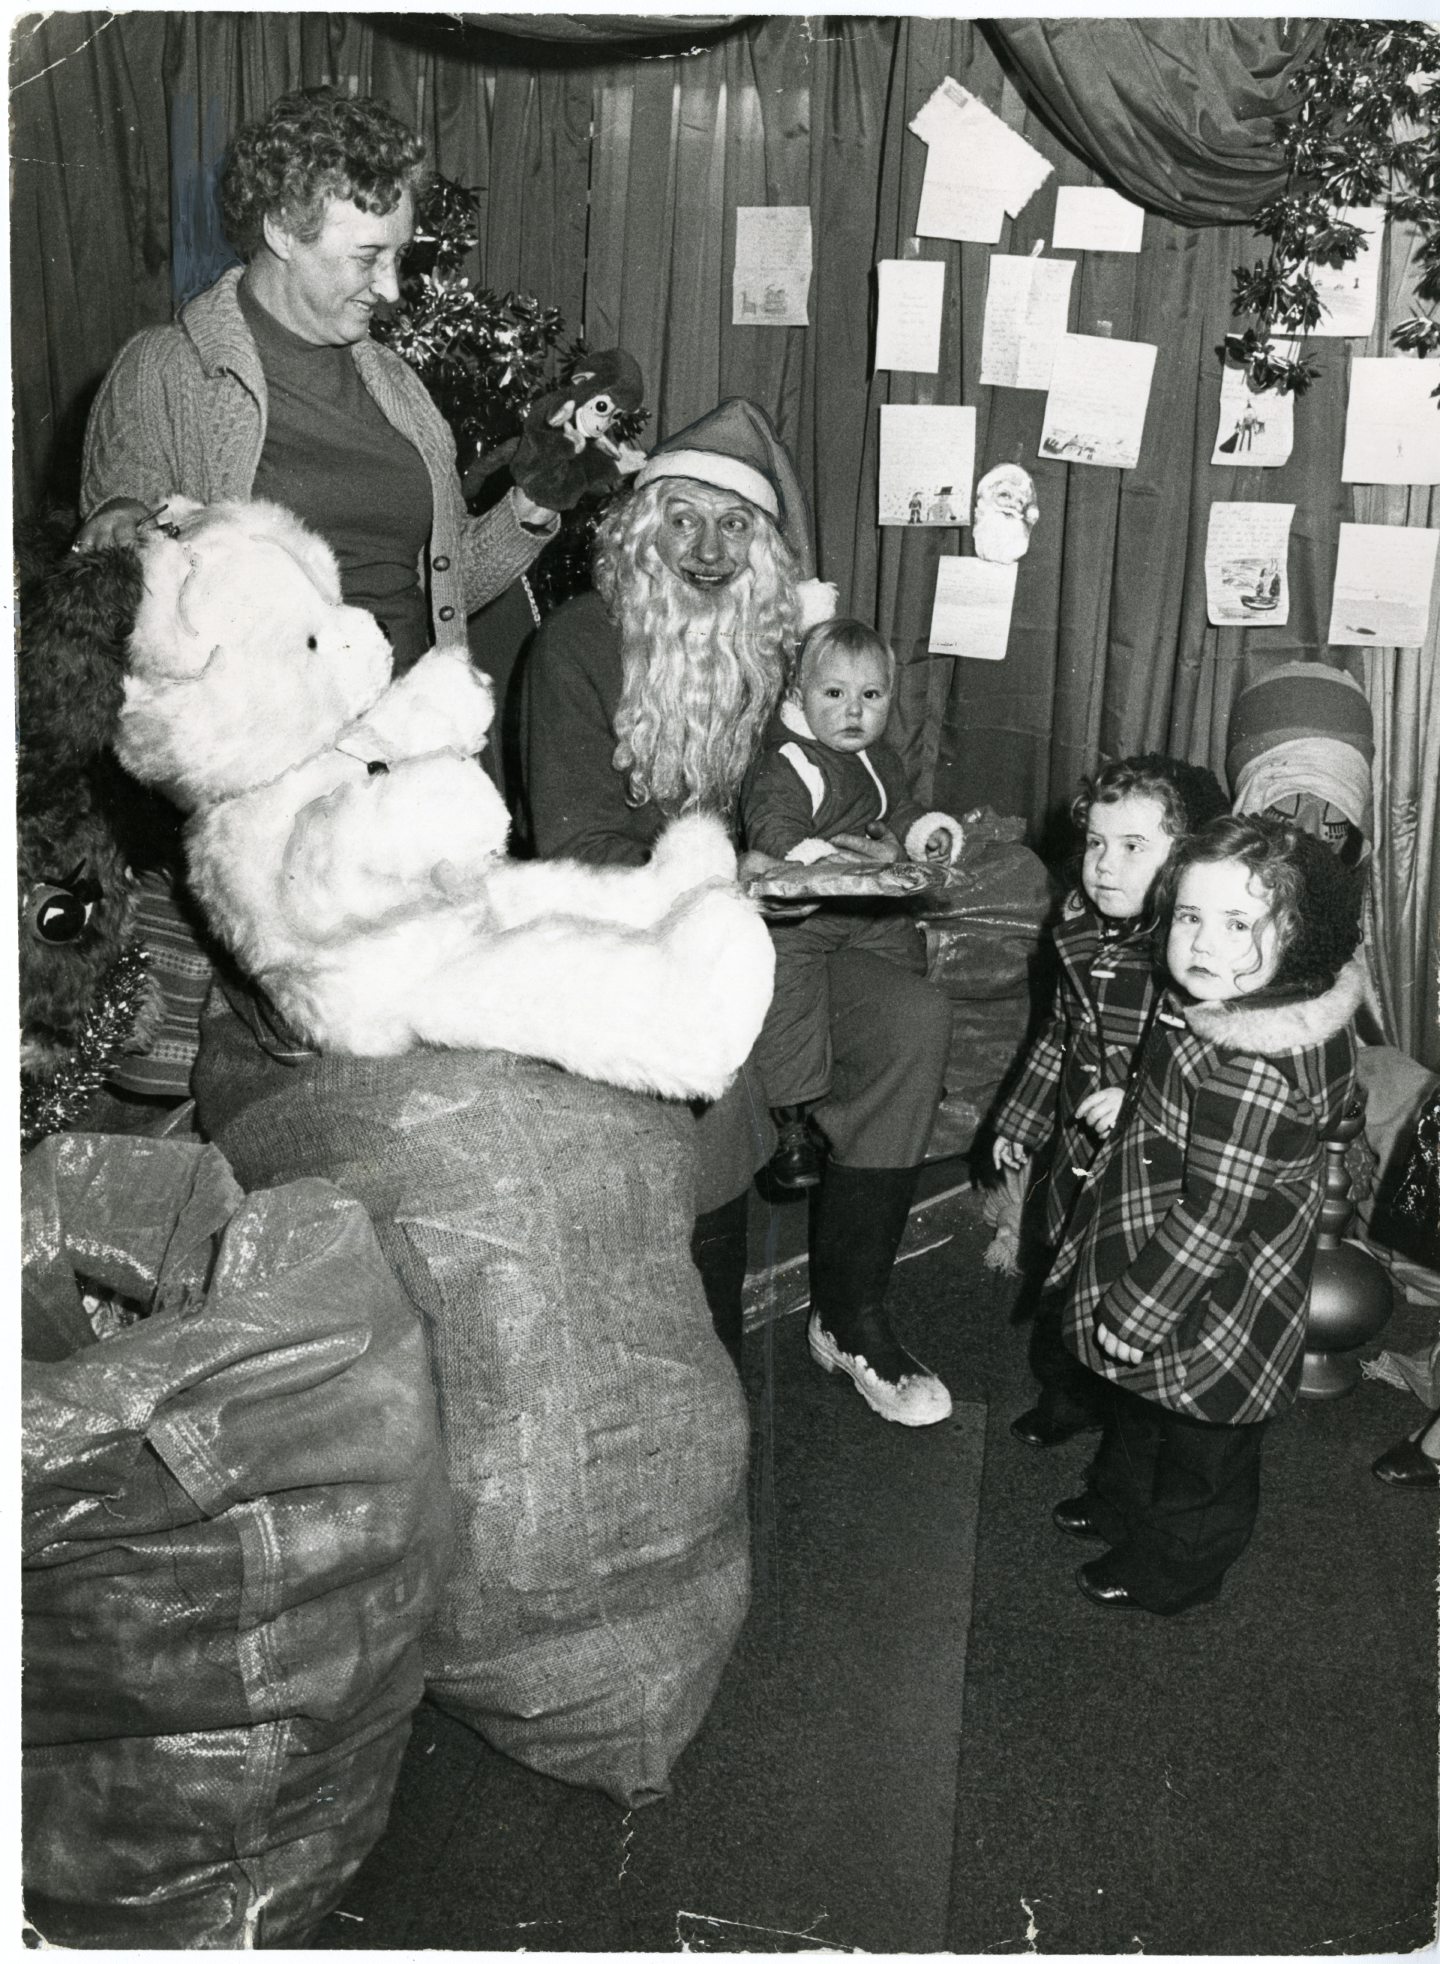 Santa at Draffens store in Dundee in 1978 to hand out presents. Image: DC Thomson.